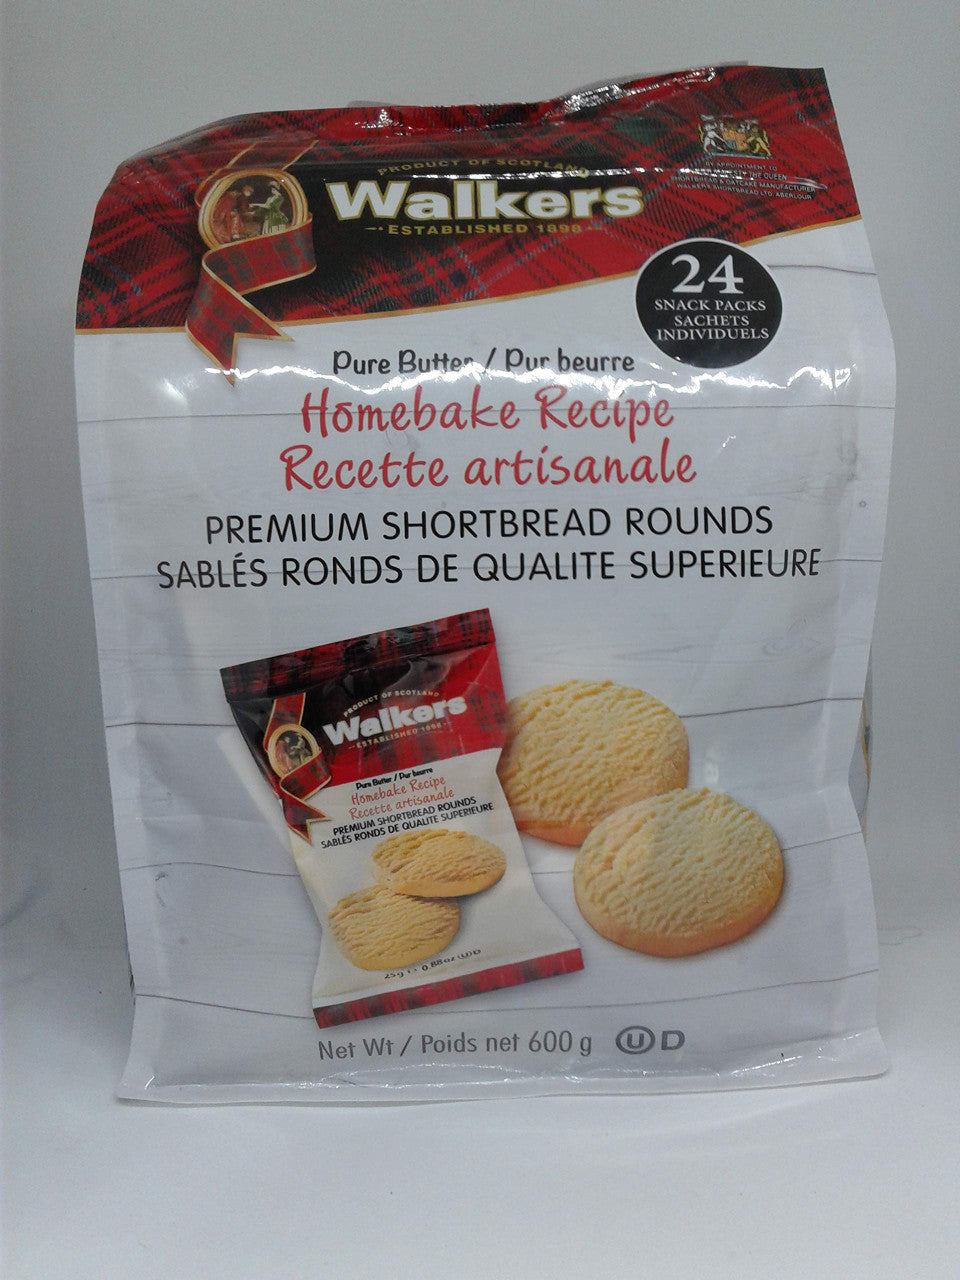 Walkers Premium Shortbread Rounds 24 Snack Packs individually wrapped.